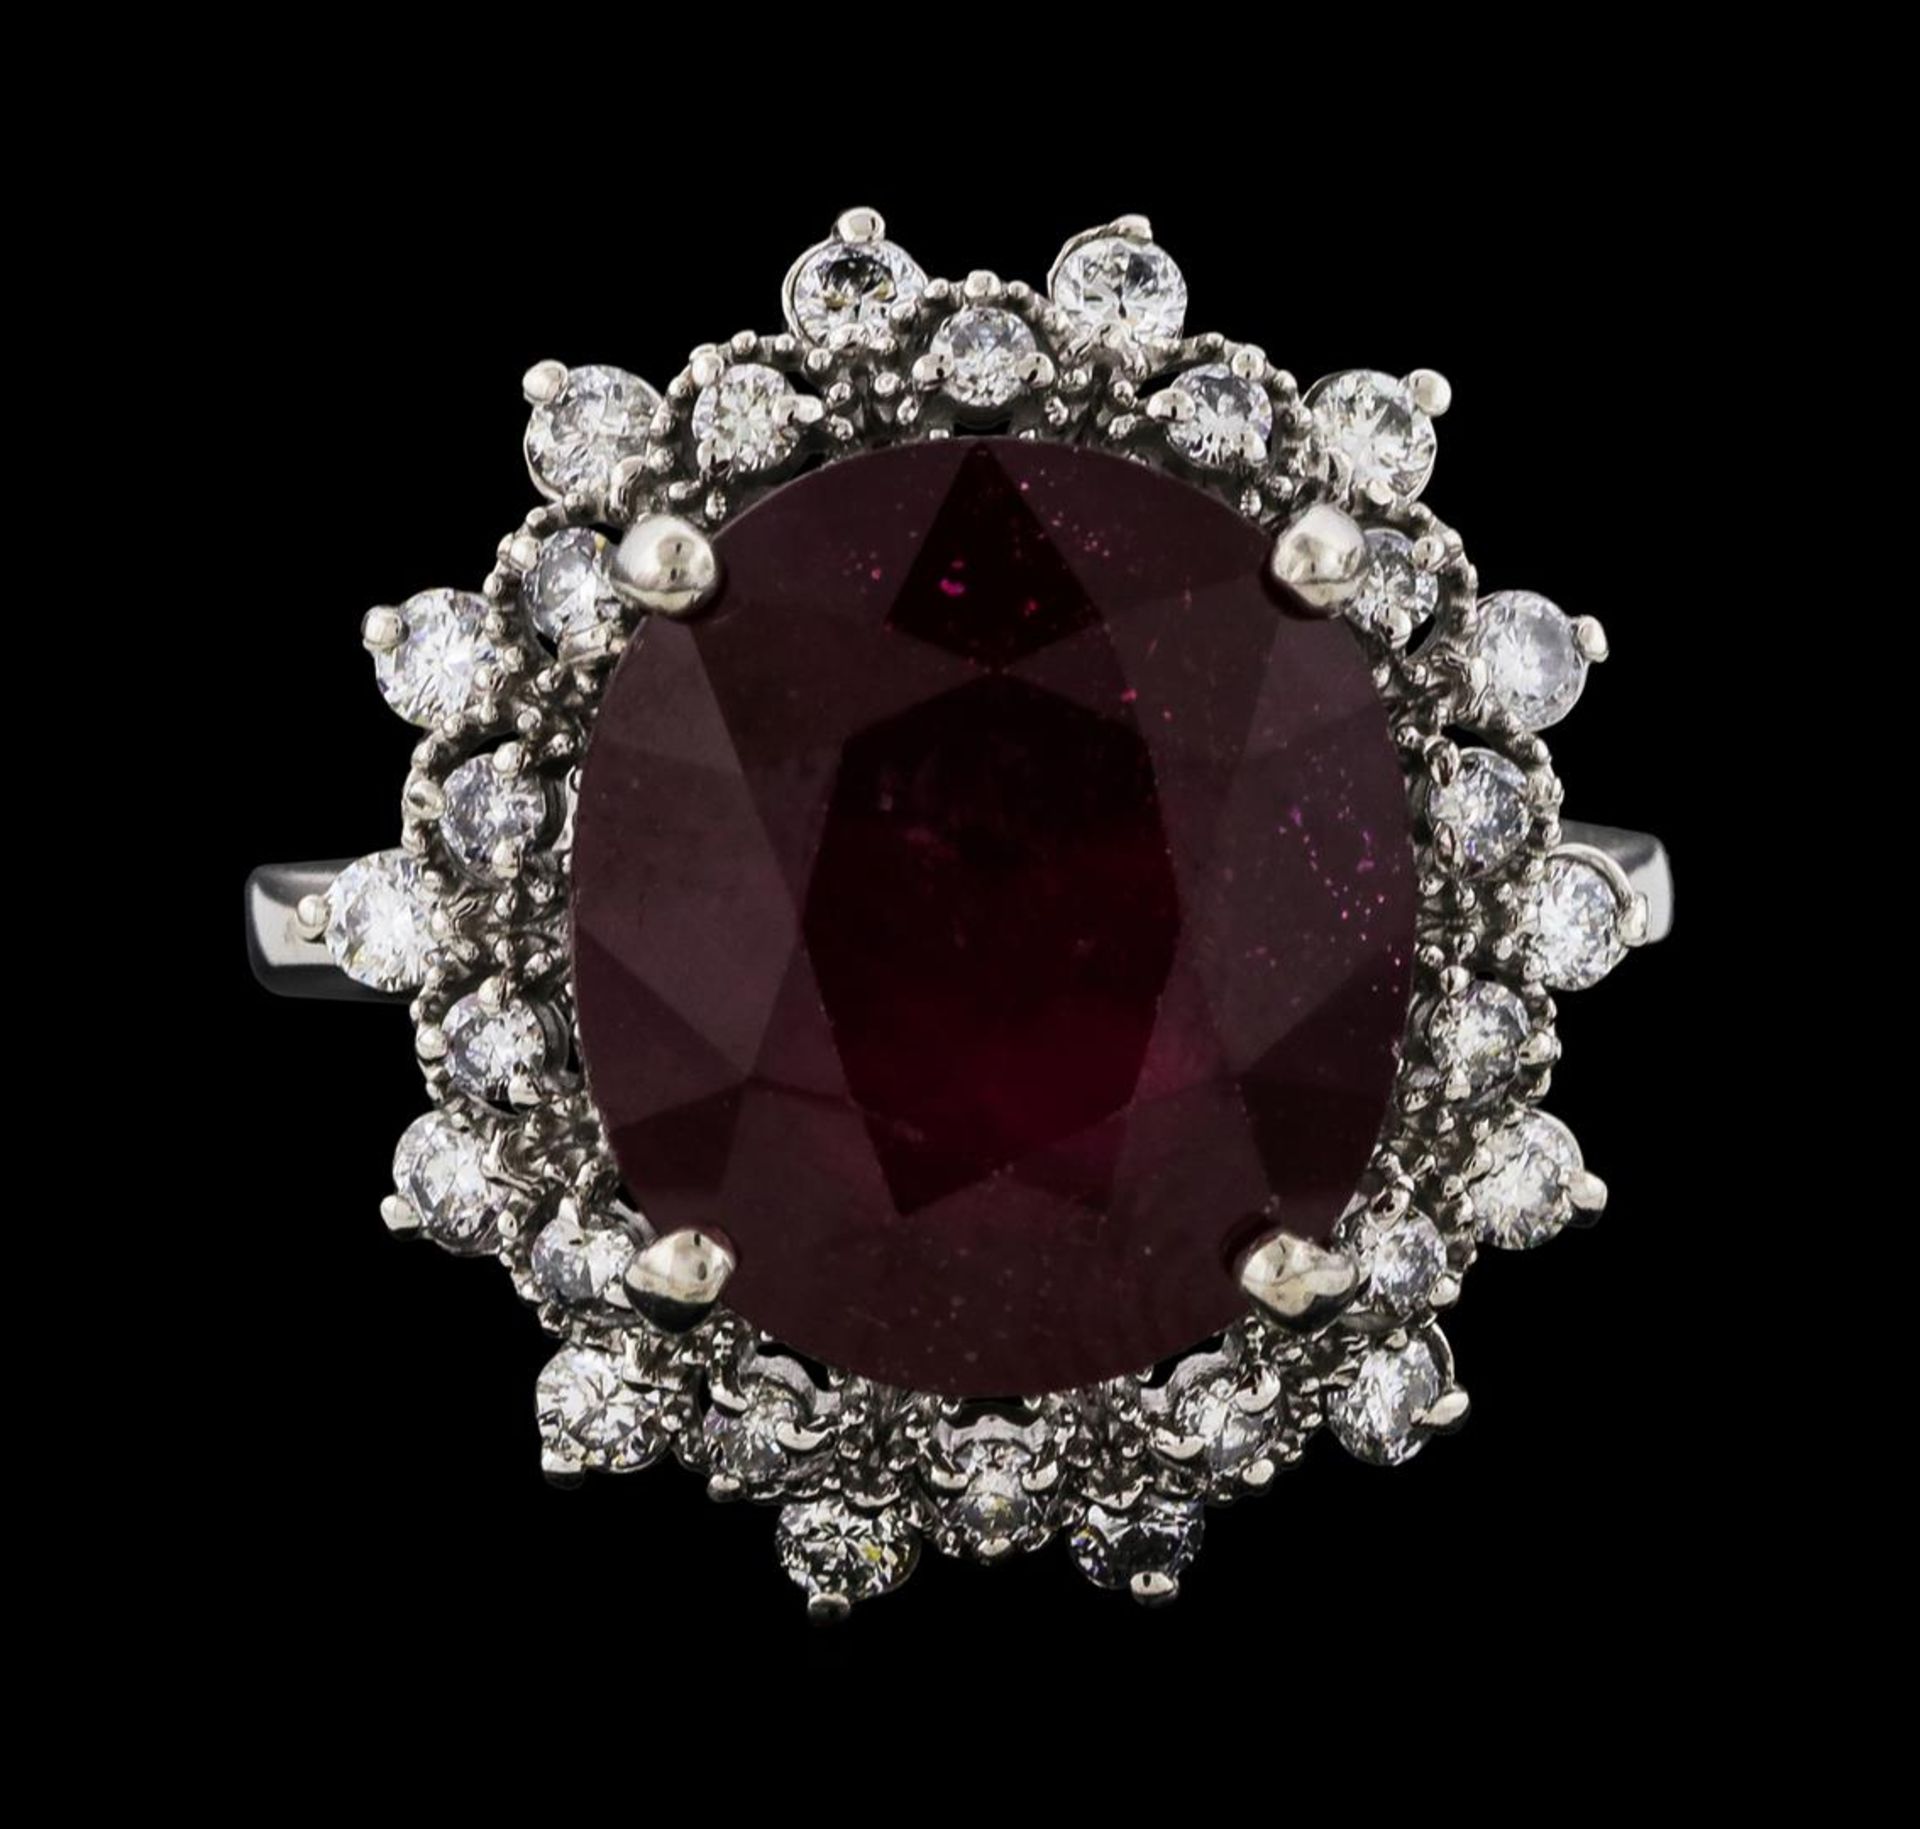 10.75 ctw Ruby and Diamond Ring - 14KT White Gold - Image 2 of 4